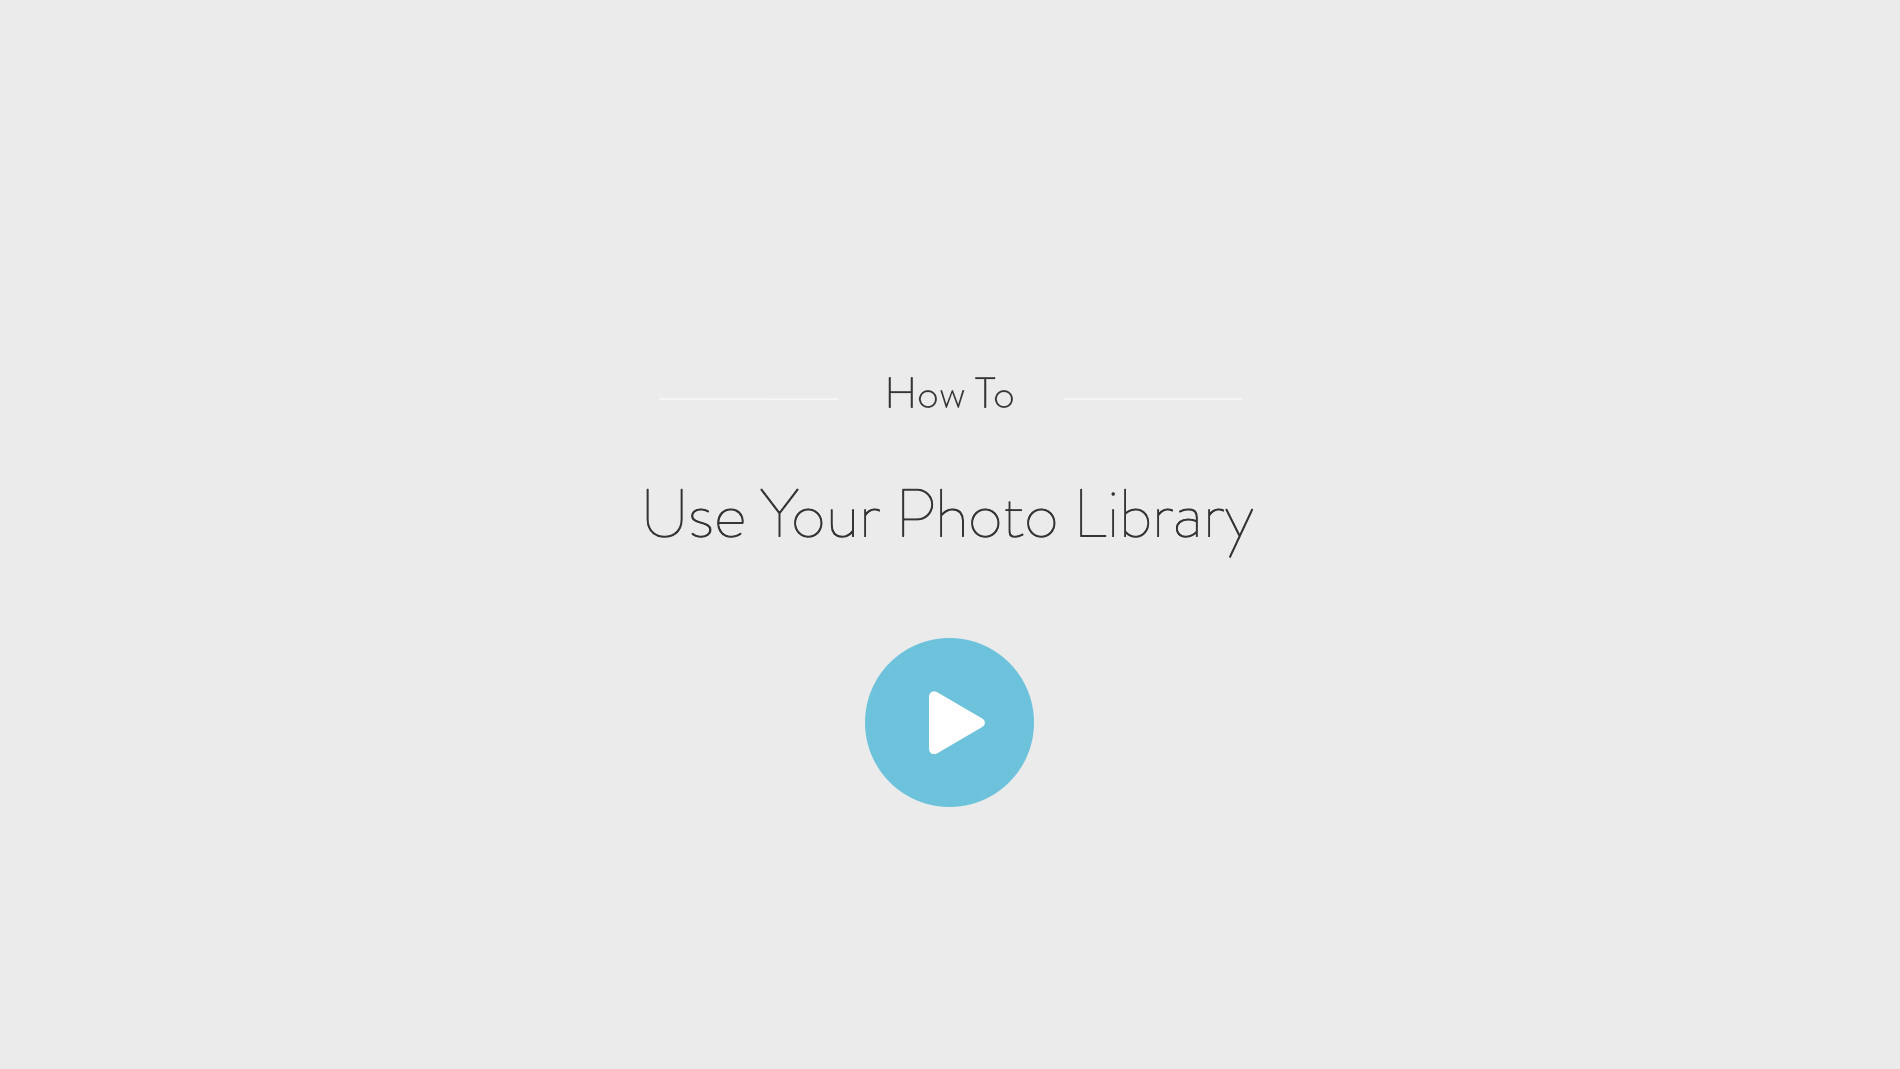 How to - Use your photo library